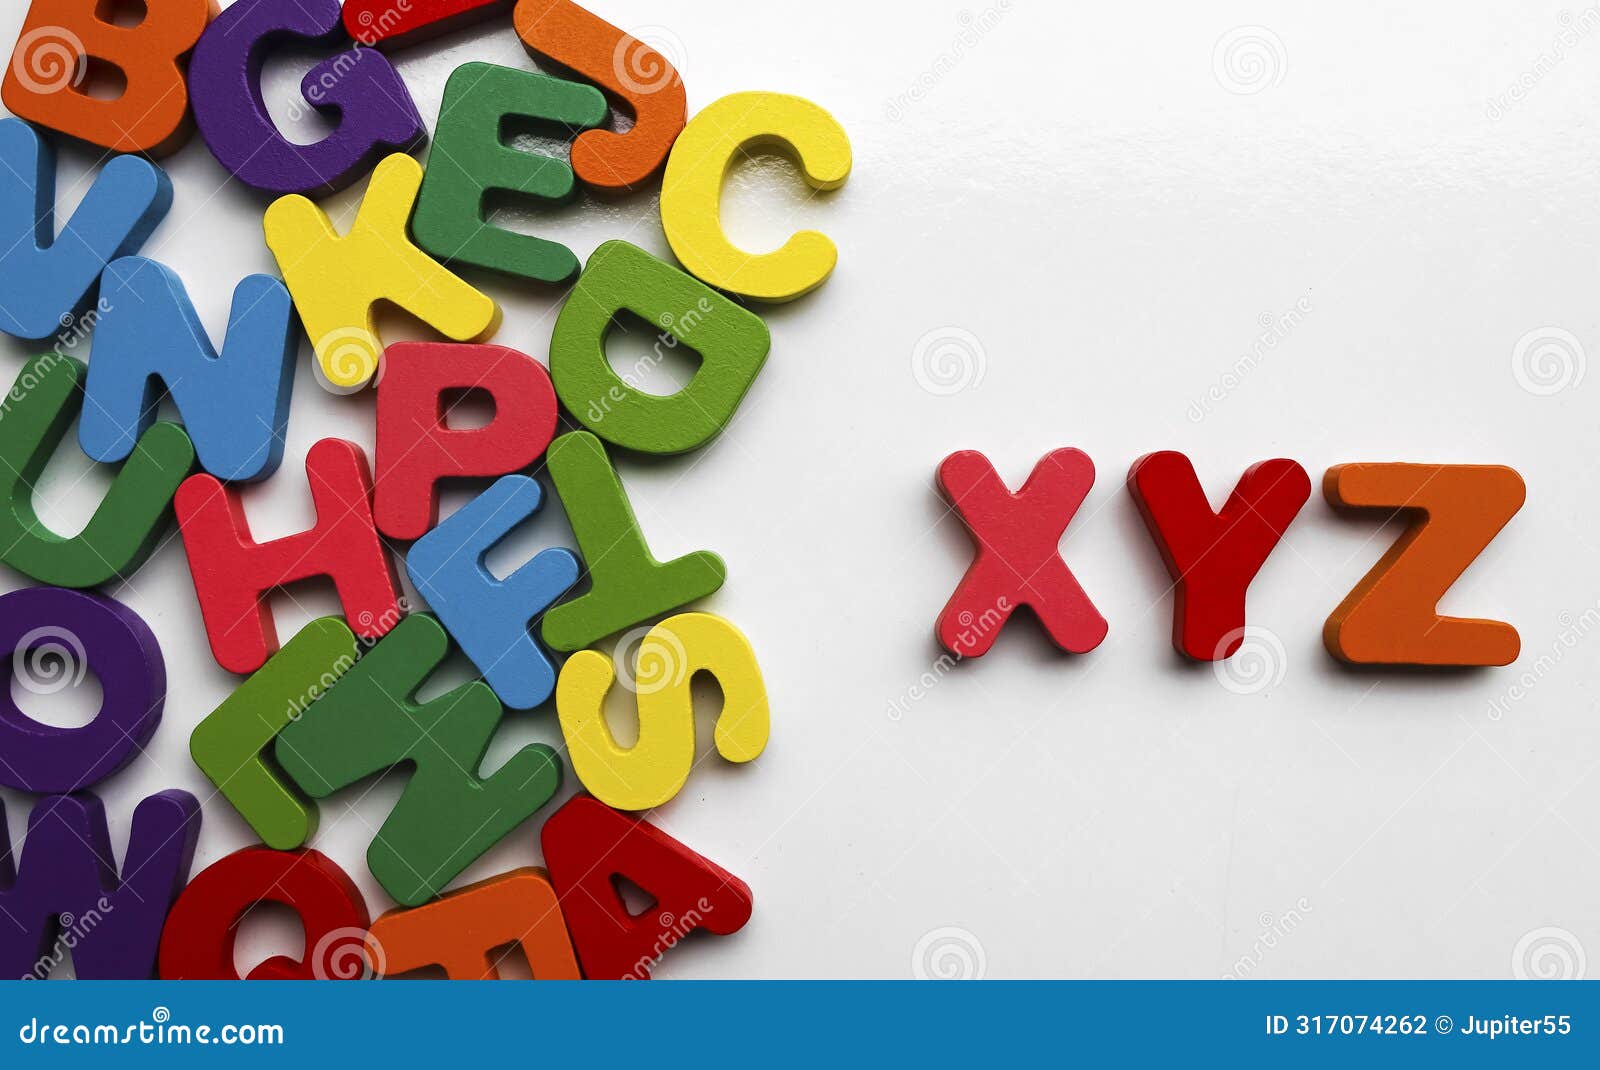 english alphabet on a white background. alphabets on a wooden surface. xyz - letters. scattered mixed colorful wooden letters of